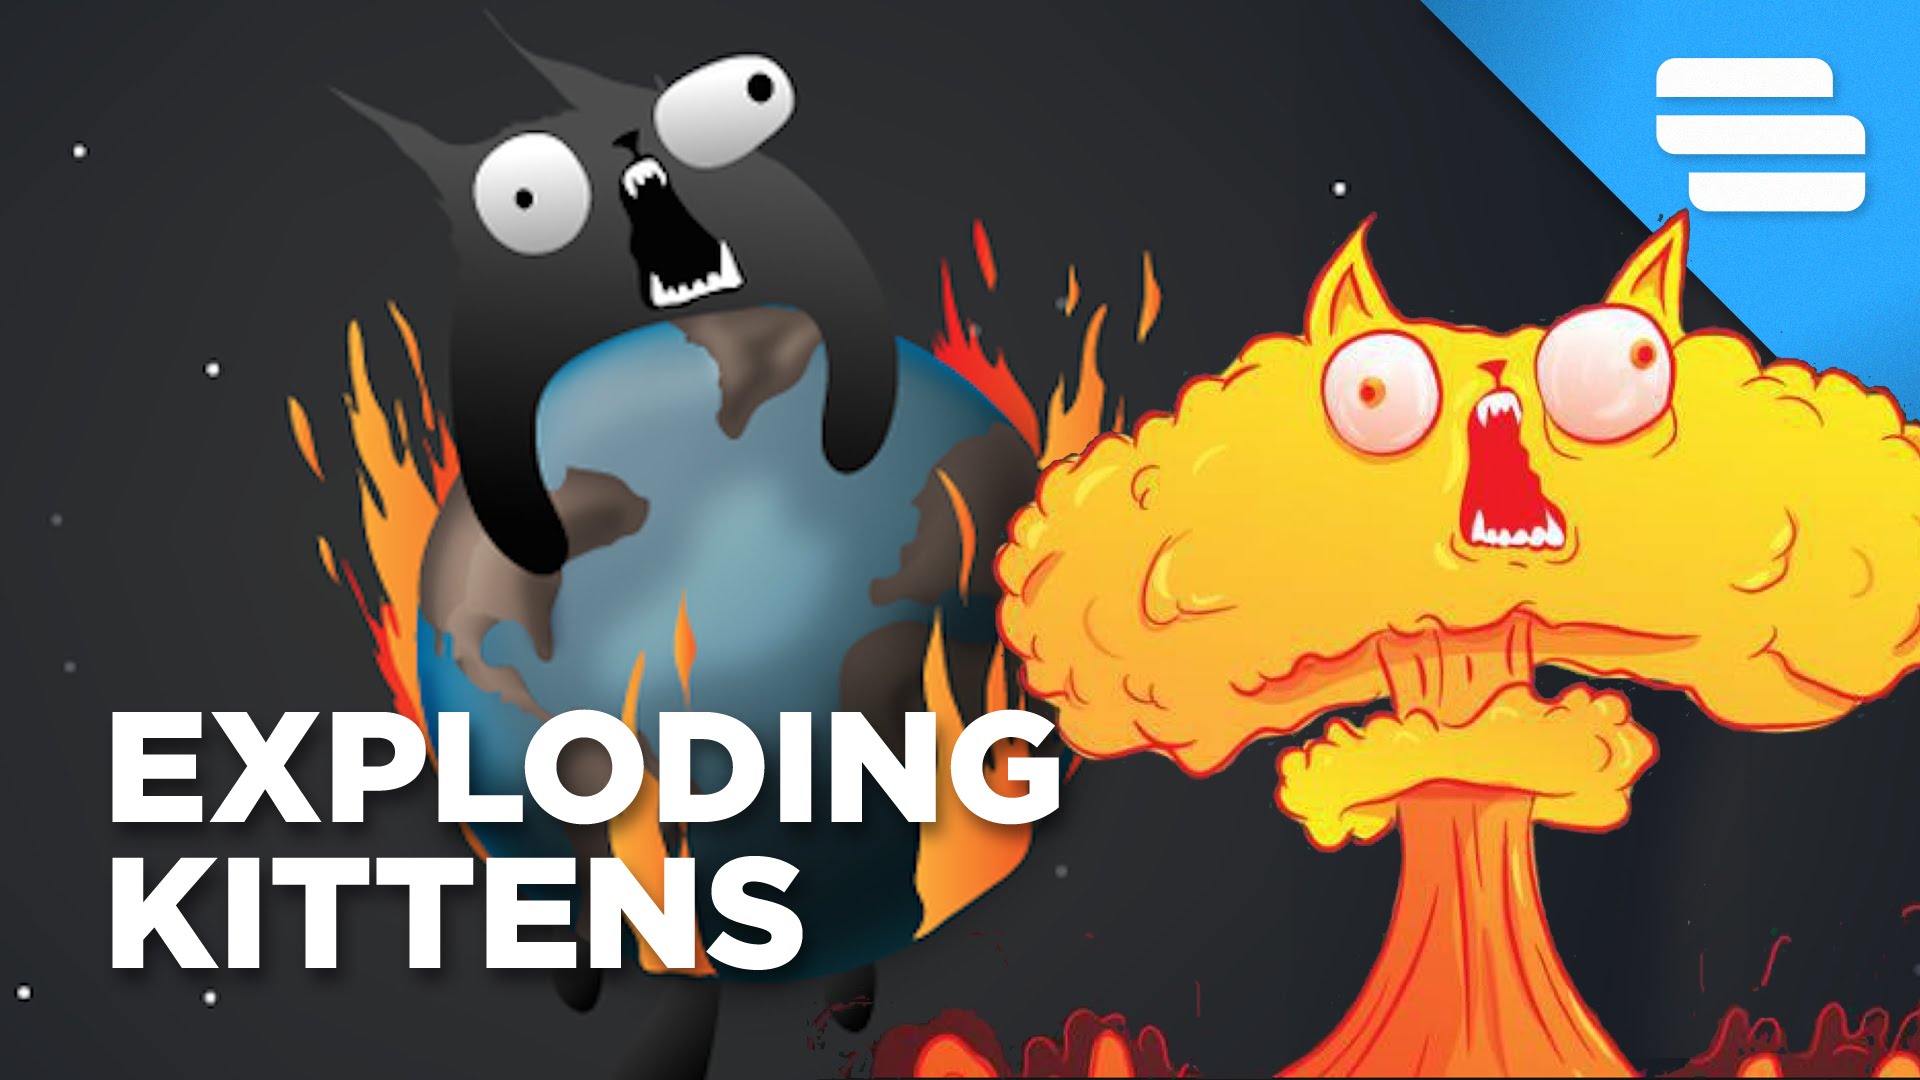 how to play exploding kittens